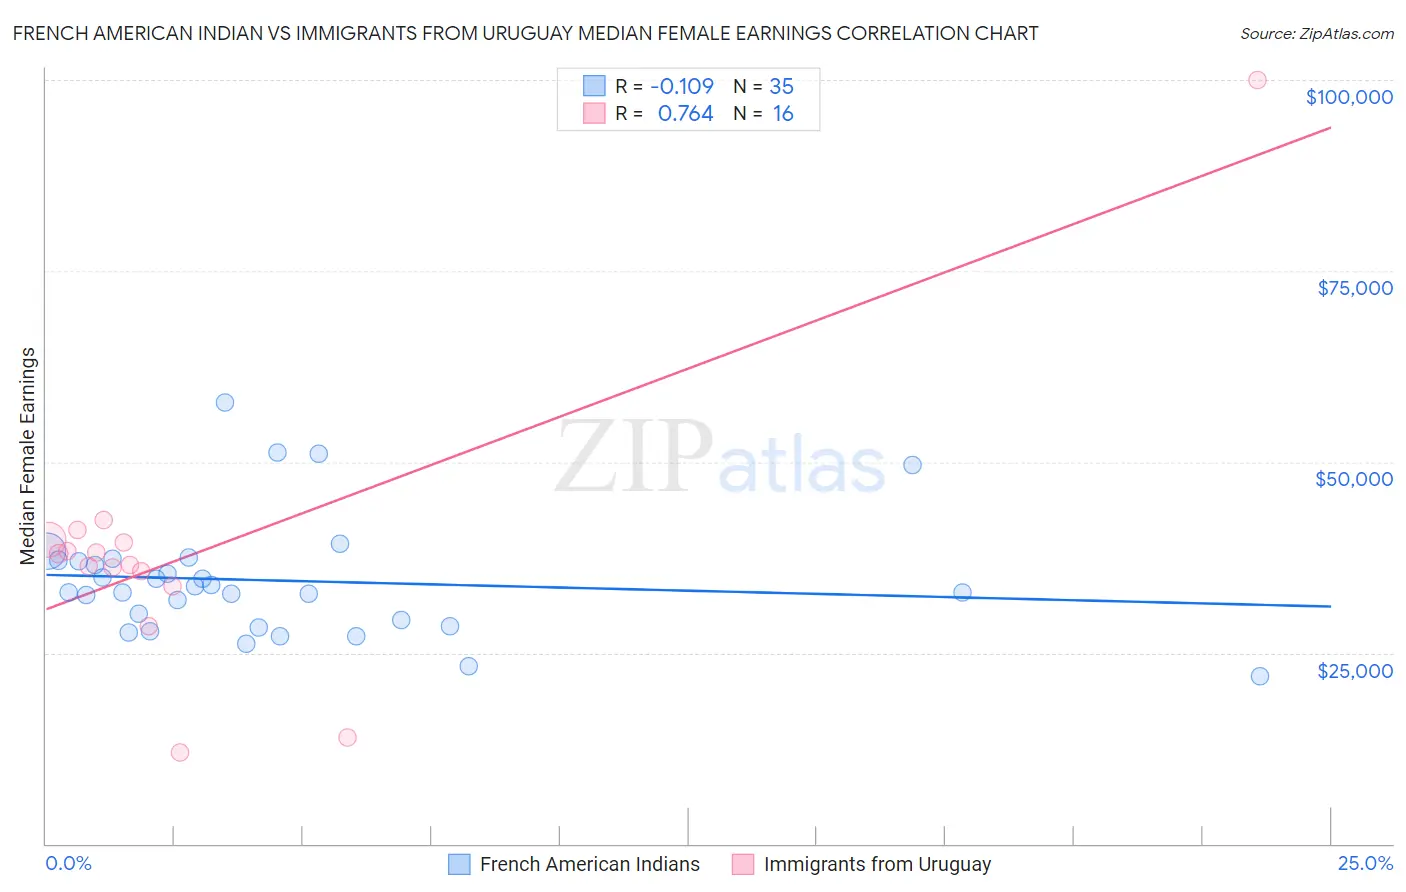 French American Indian vs Immigrants from Uruguay Median Female Earnings